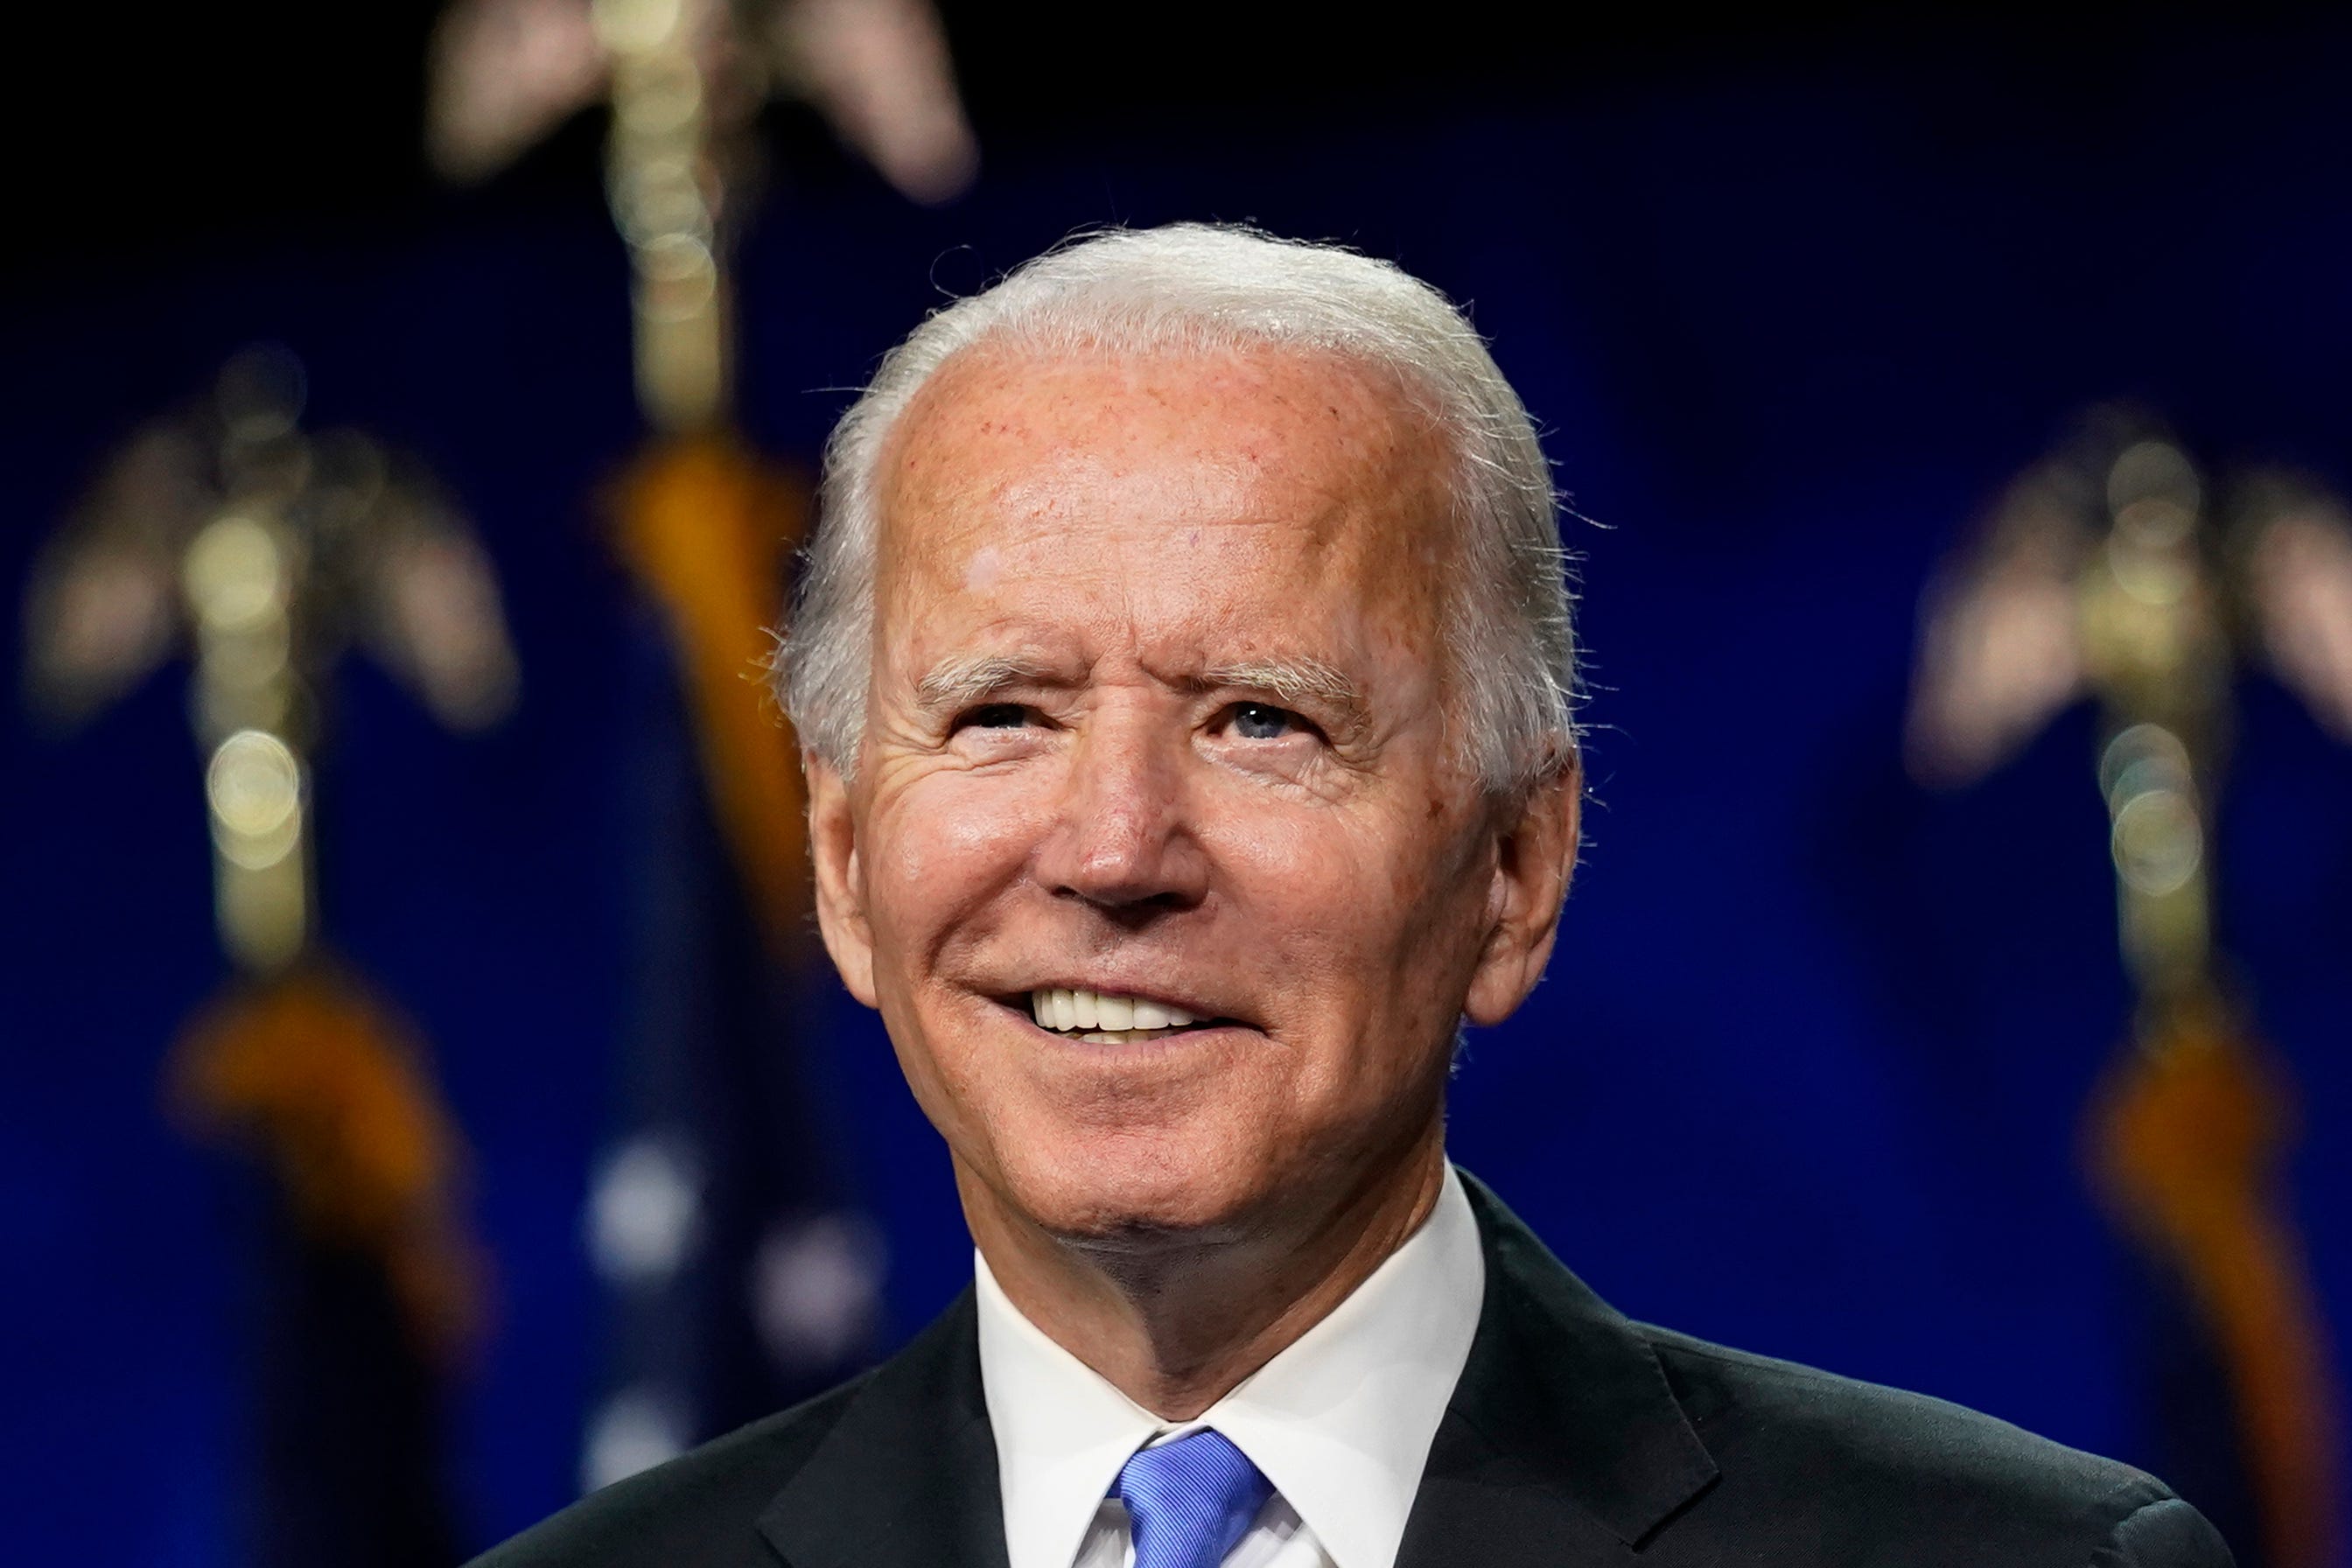 joe biden bat signal - Biden|President|Joe|States|Delaware|Obama|Vice|Senate|Campaign|Election|Time|Administration|House|Law|People|Years|Family|Year|Trump|School|University|Senator|Office|Party|Country|Committee|Act|War|Days|Climate|Hunter|Health|America|State|Day|Democrats|Americans|Documents|Care|Plan|United States|Vice President|White House|Joe Biden|Biden Administration|Democratic Party|Law School|Presidential Election|President Joe Biden|Executive Orders|Foreign Relations Committee|Presidential Campaign|Second Term|47Th Vice President|Syracuse University|Climate Change|Hillary Clinton|Last Year|Barack Obama|Joseph Robinette Biden|U.S. Senator|Health Care|U.S. Senate|Donald Trump|President Trump|President Biden|Federal Register|Judiciary Committee|Presidential Nomination|Presidential Medal